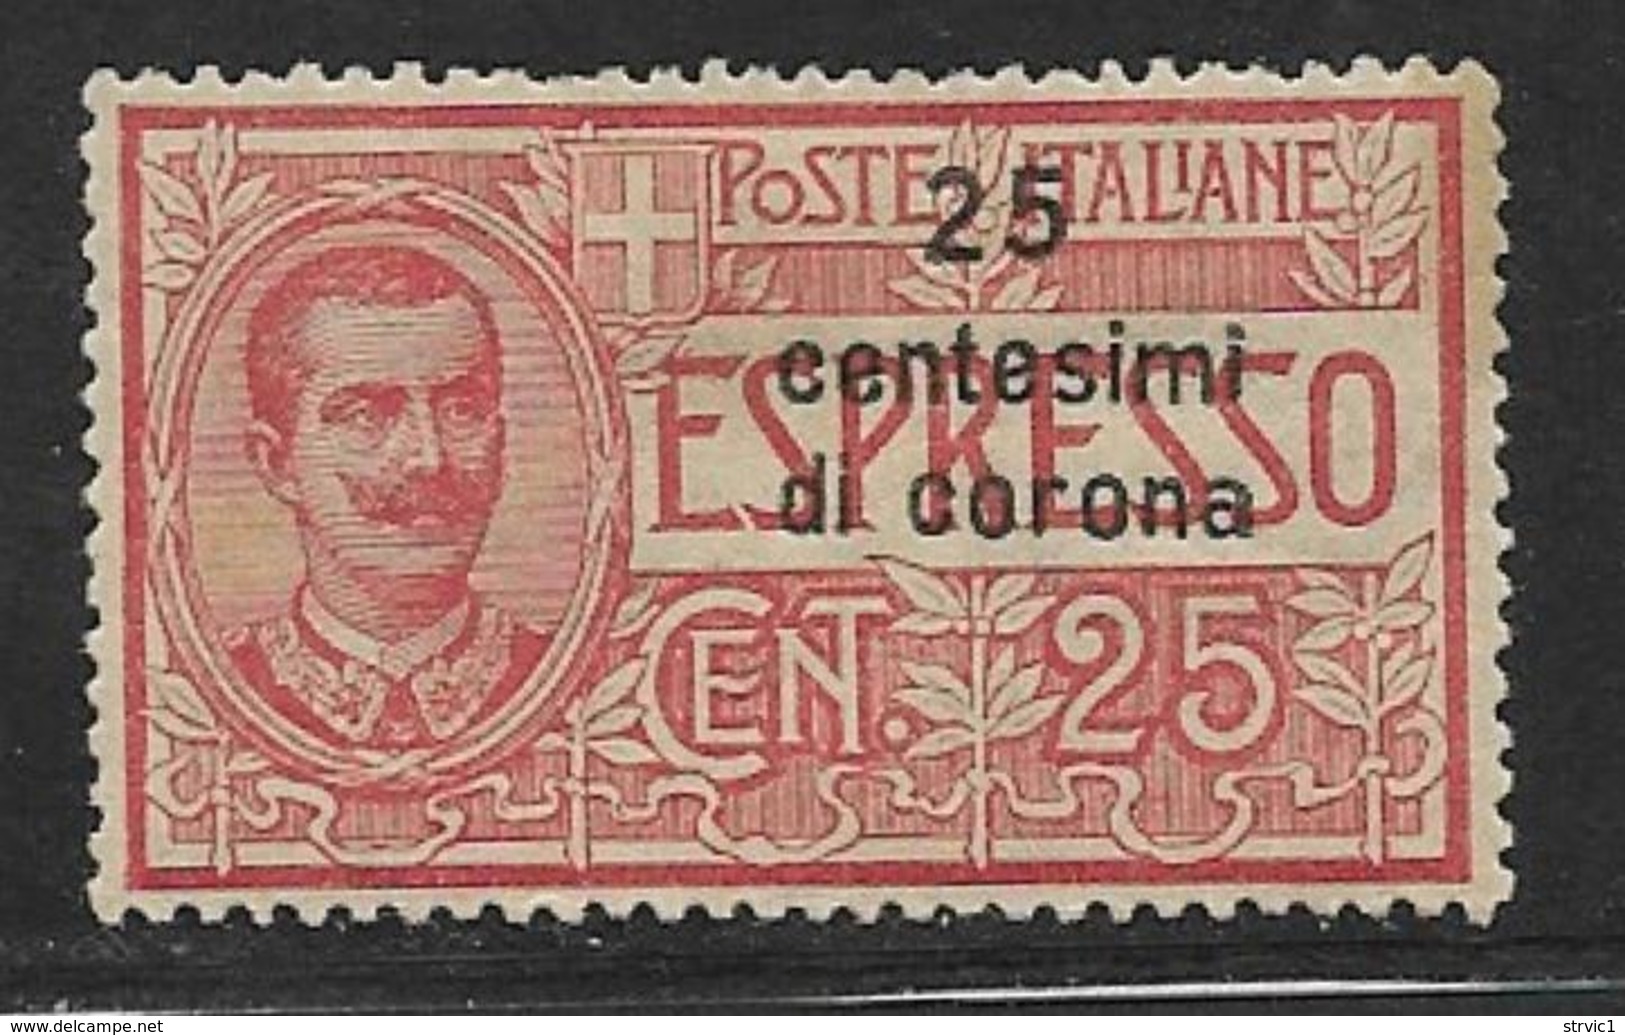 Italy Occupation Dalmatia Scott # E1 Mint Hinged Italy Special Delivery Stamp Surcharged, 1921 - Dalmatia